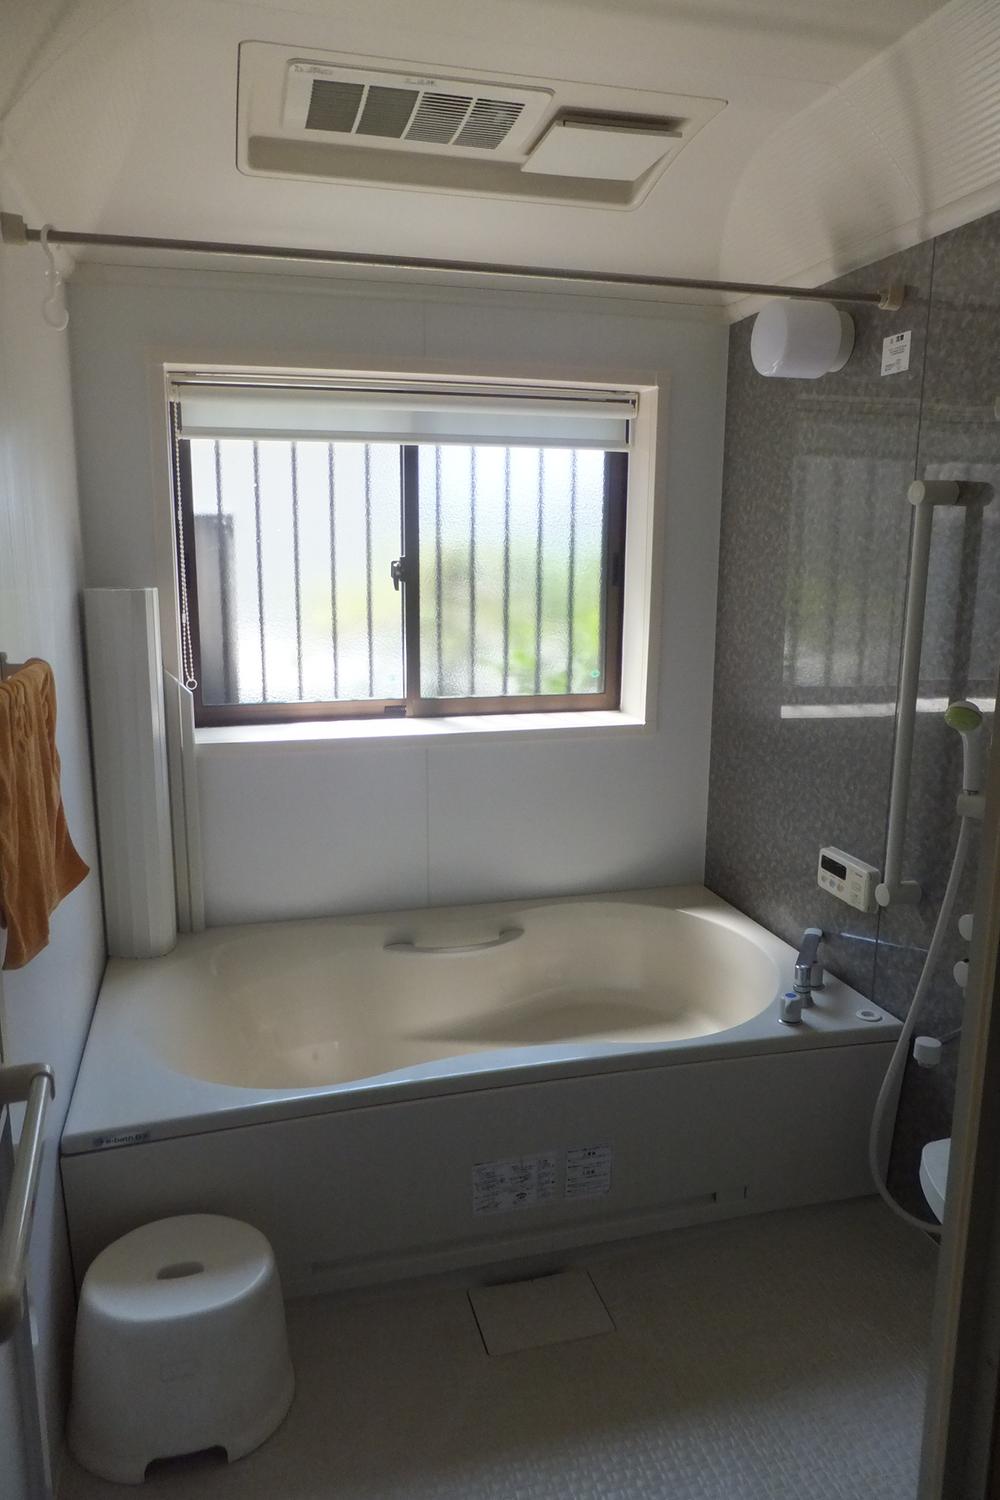 Bathroom. 1 pyeong type with with dryer exhaust fan